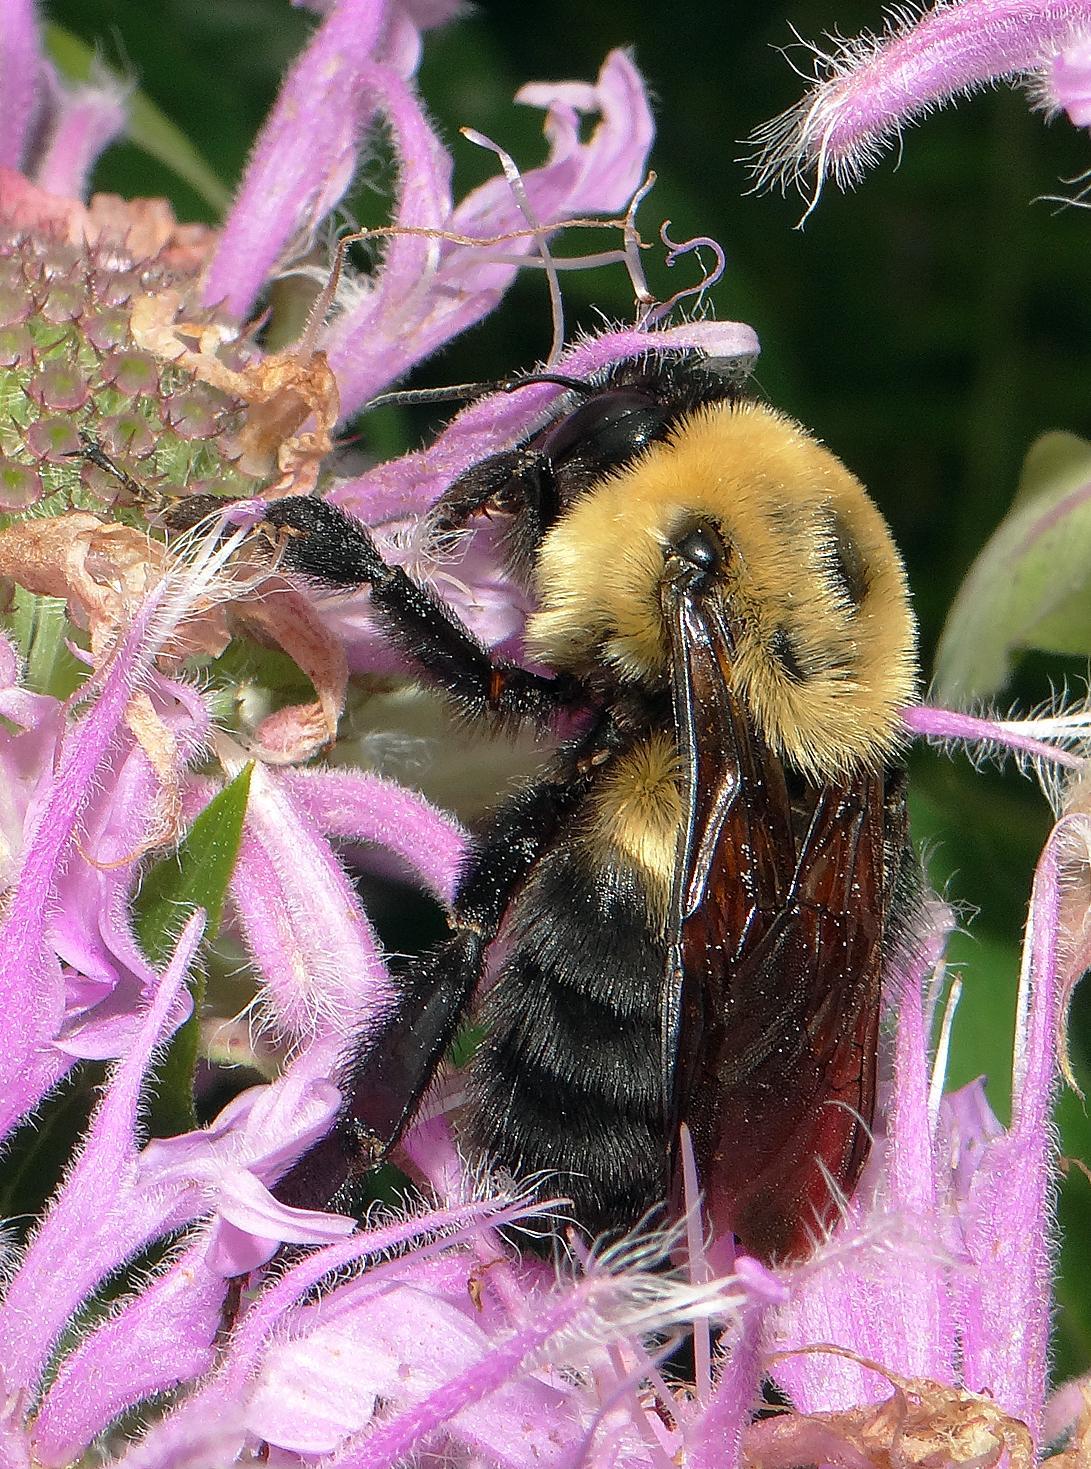 Brown-belted bumble bee Photo by Robert Behrstock